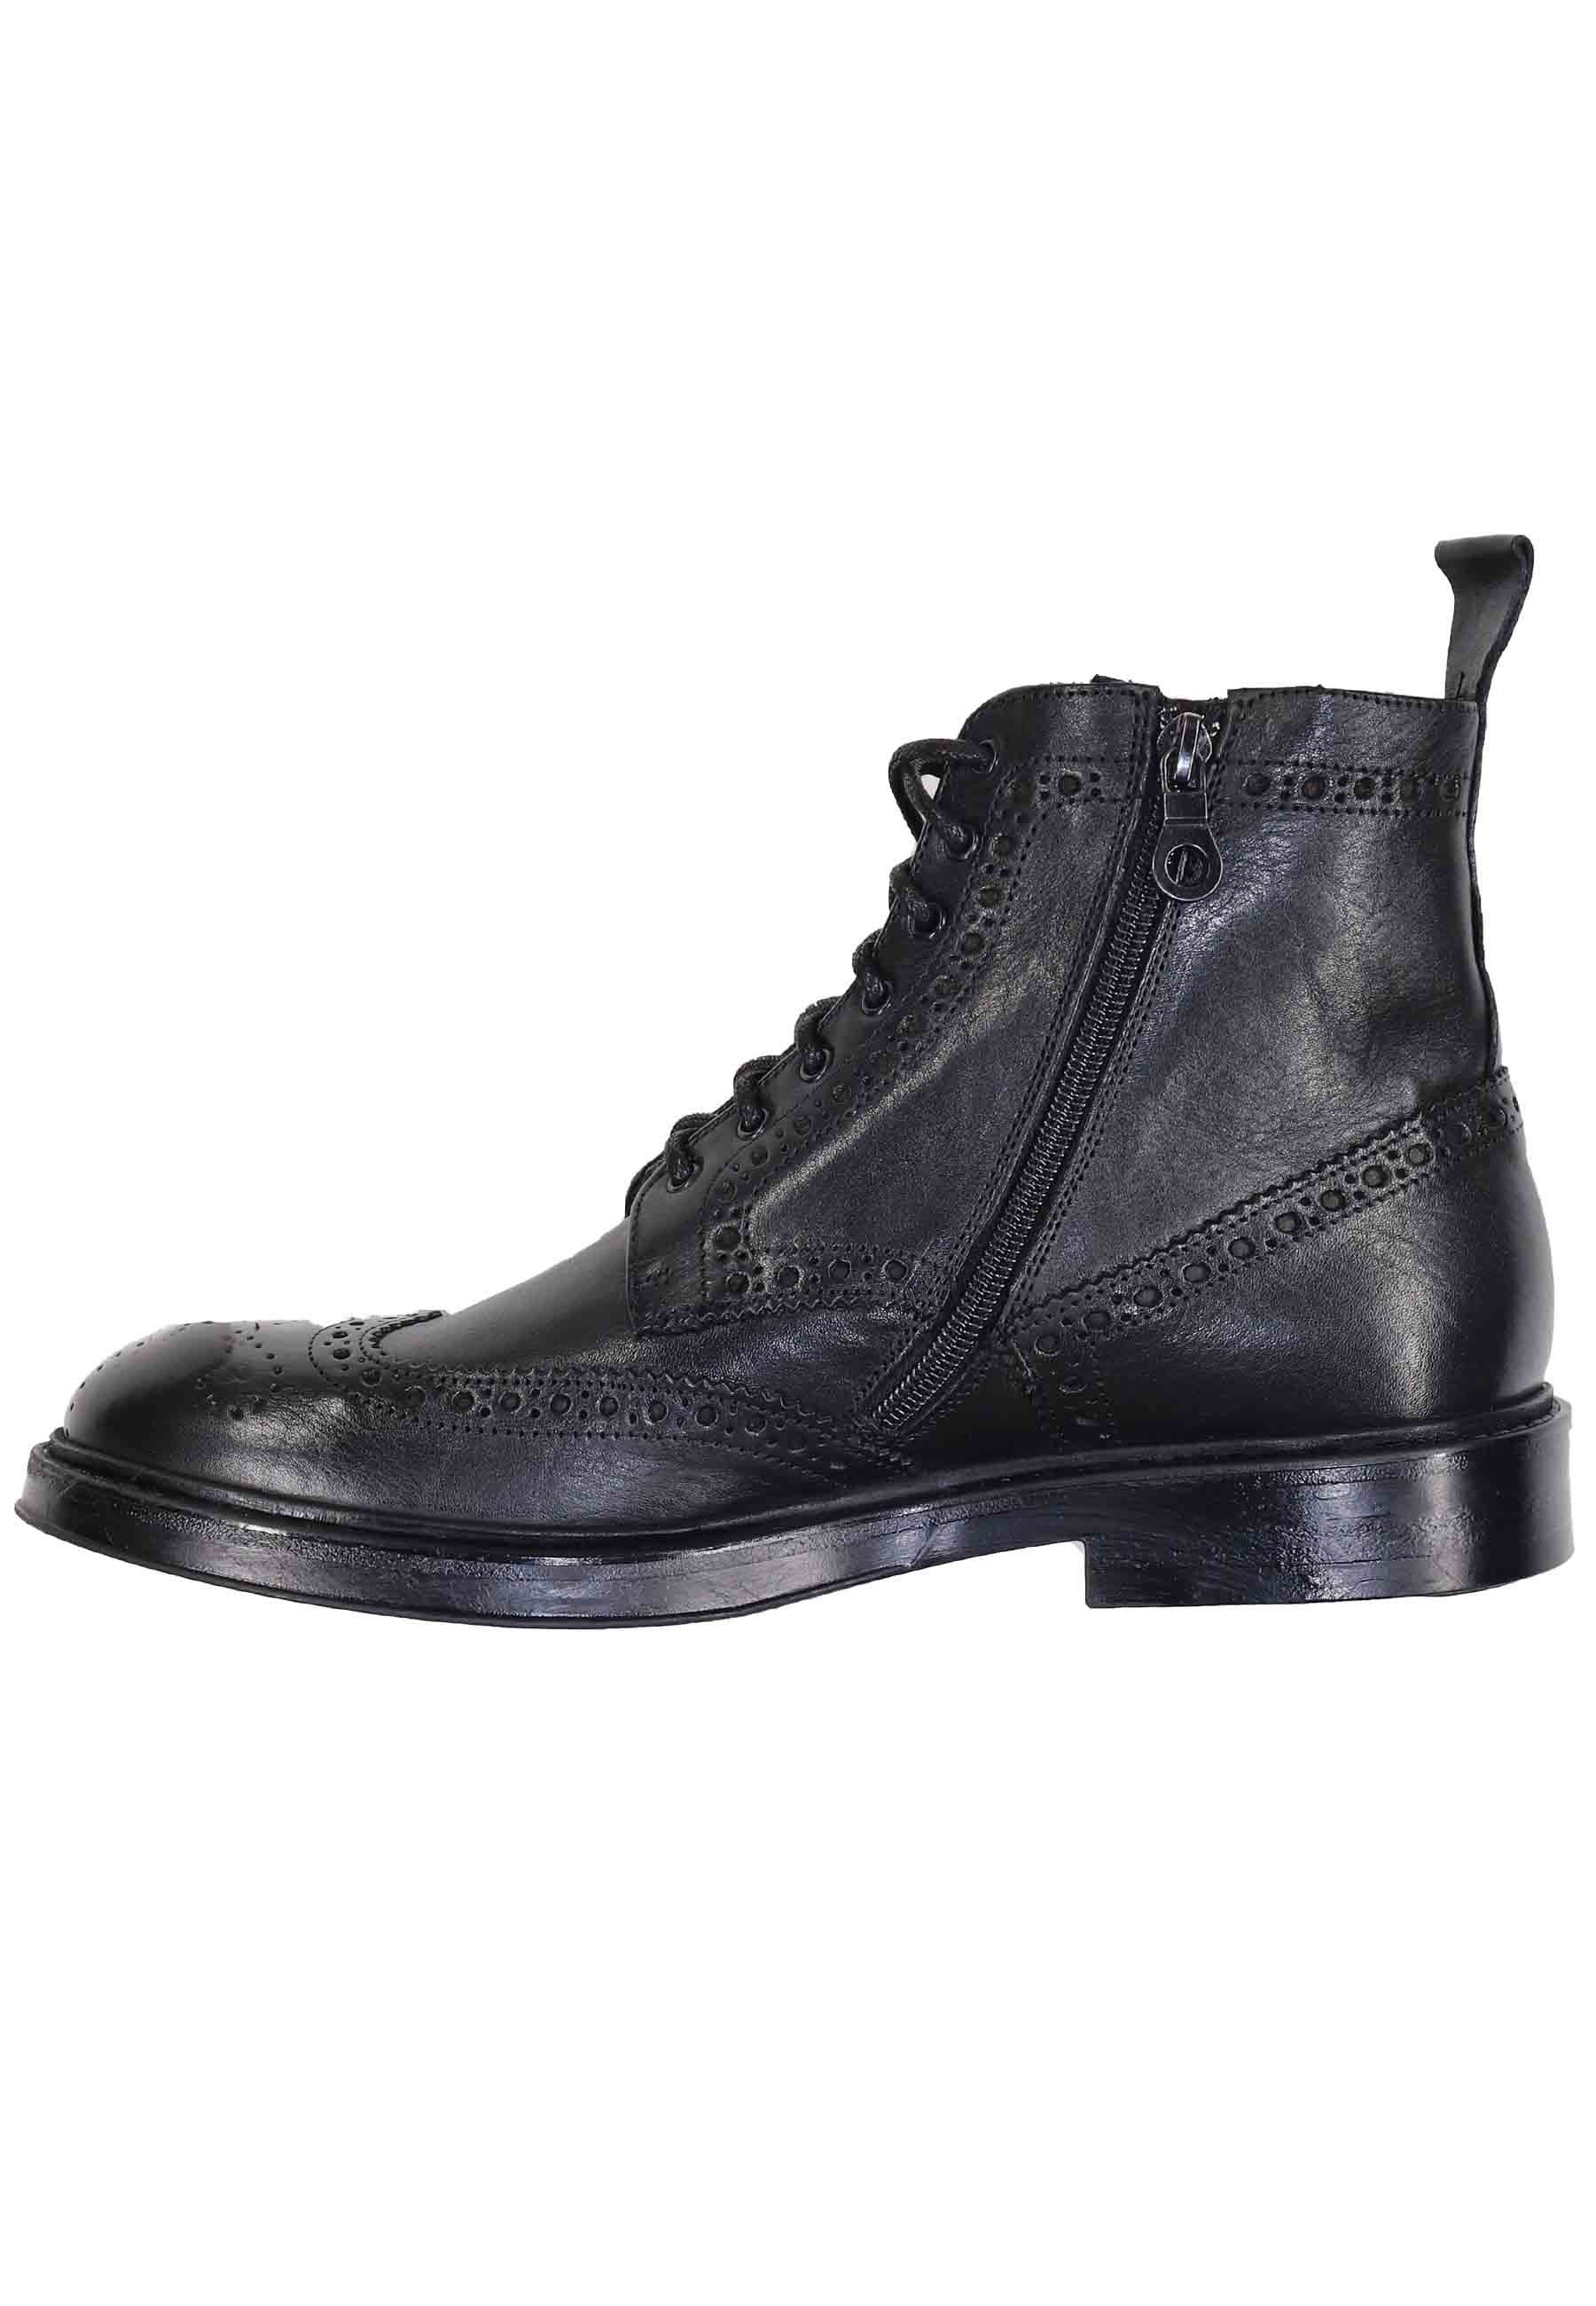 Men's lace-up ankle boots in black leather with stitching and rubber sole